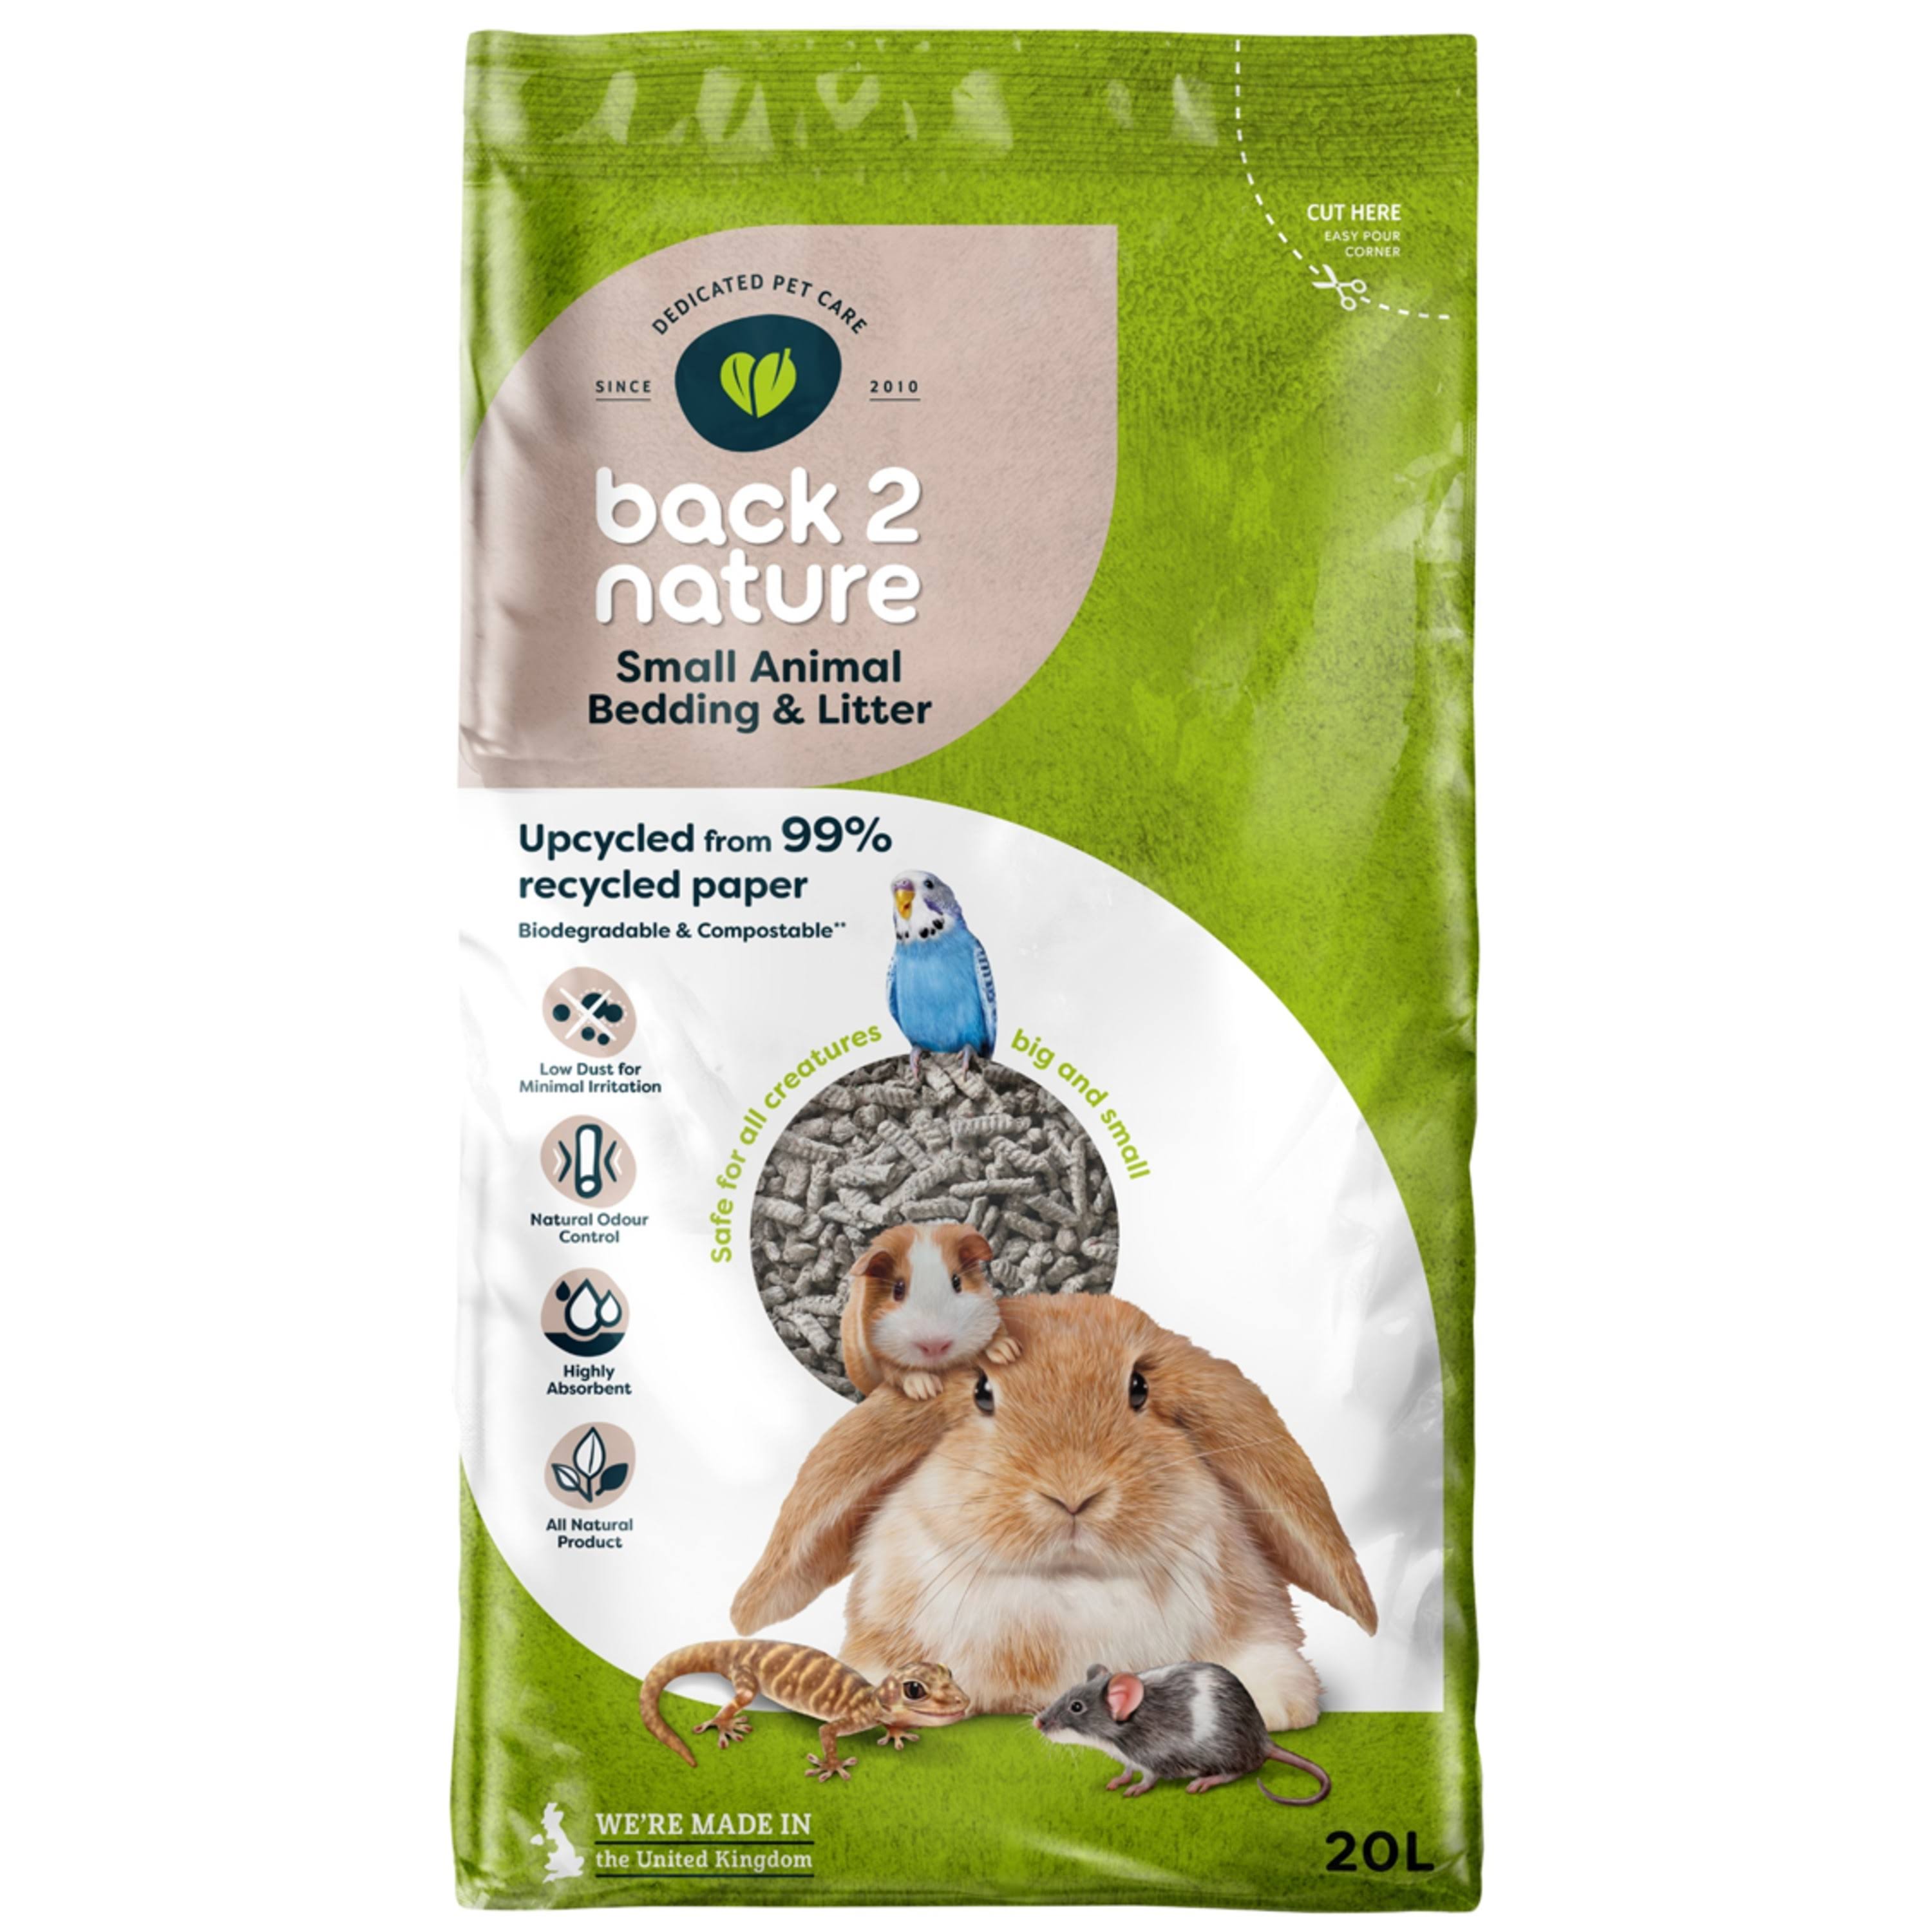 Back 2 Nature Small Animal Bedding & Litter - 20 L